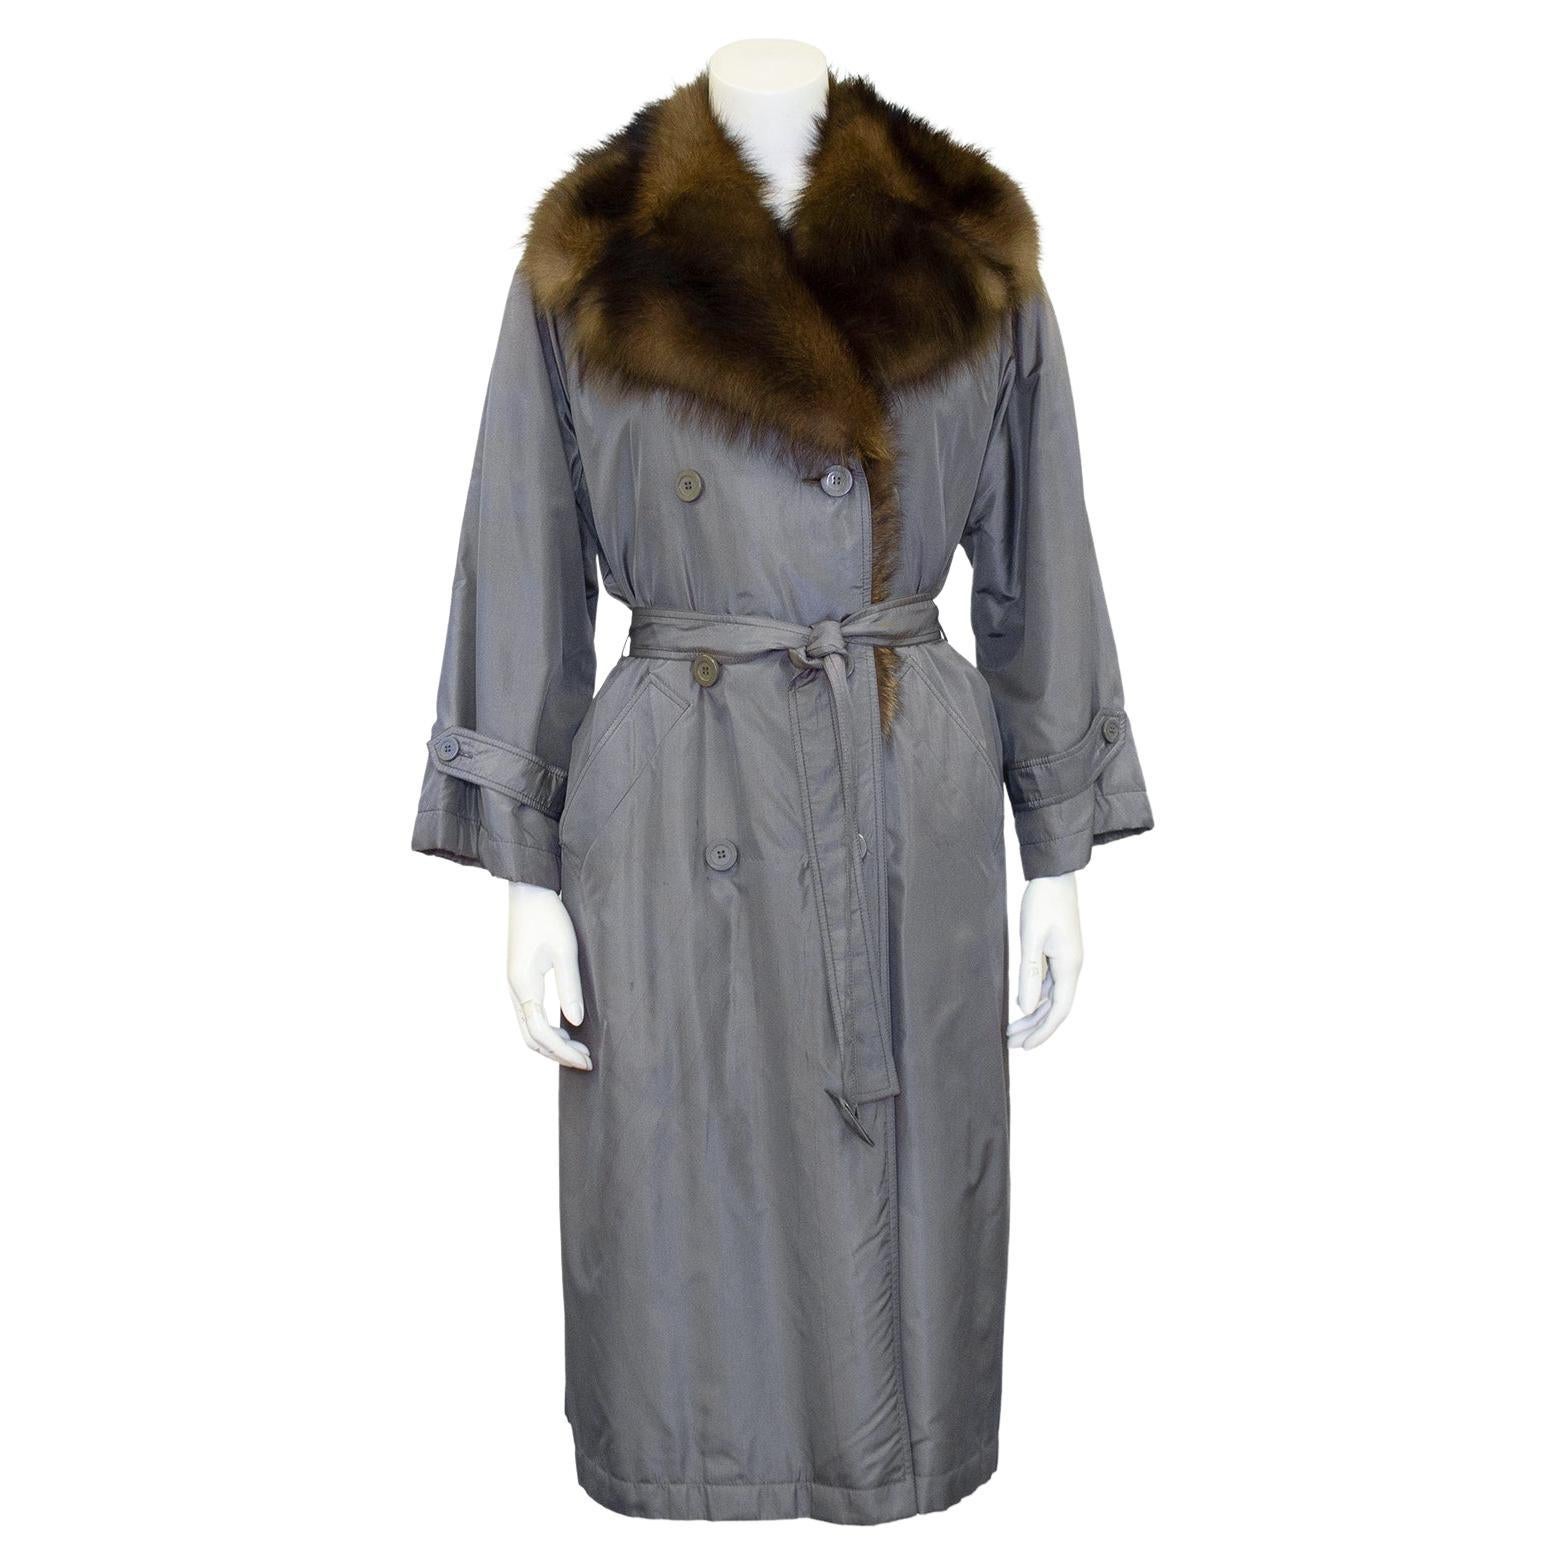 Autumn/Winter 1977 Christian Dior Haute Couture Trench Coat with Fur Collar For Sale